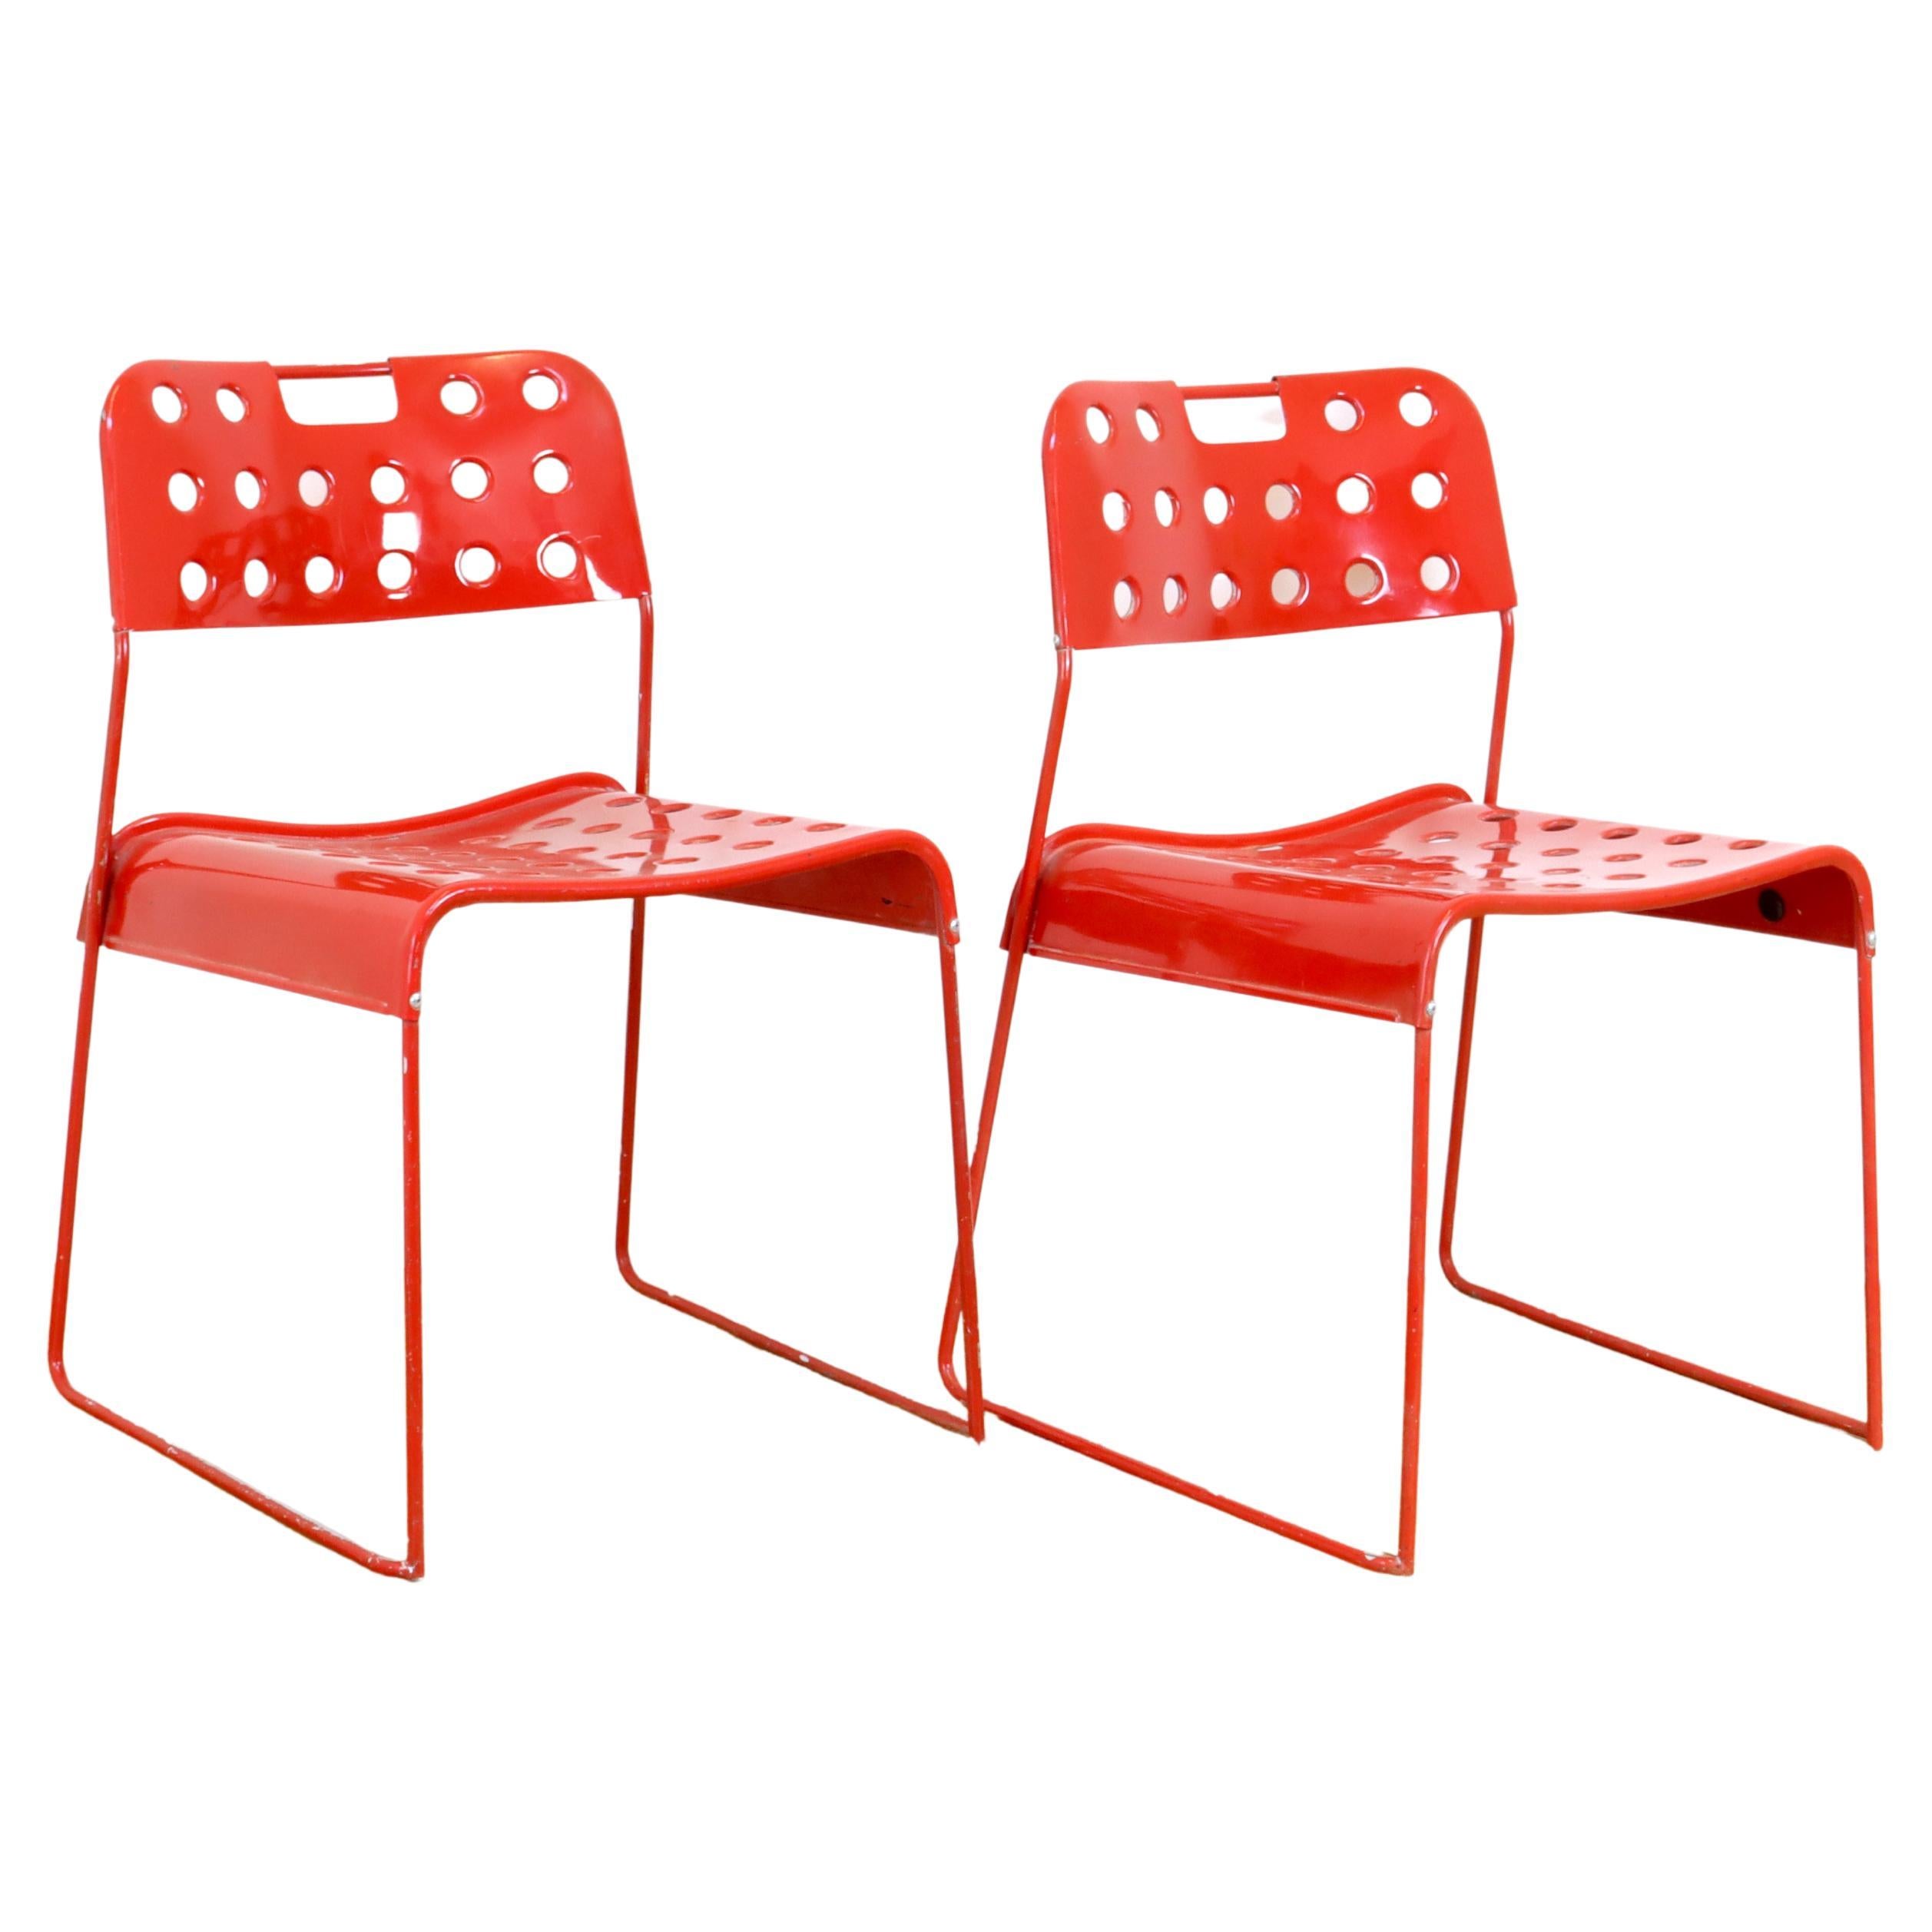 Pair of Vintage Red Omkstak Chairs  For Sale